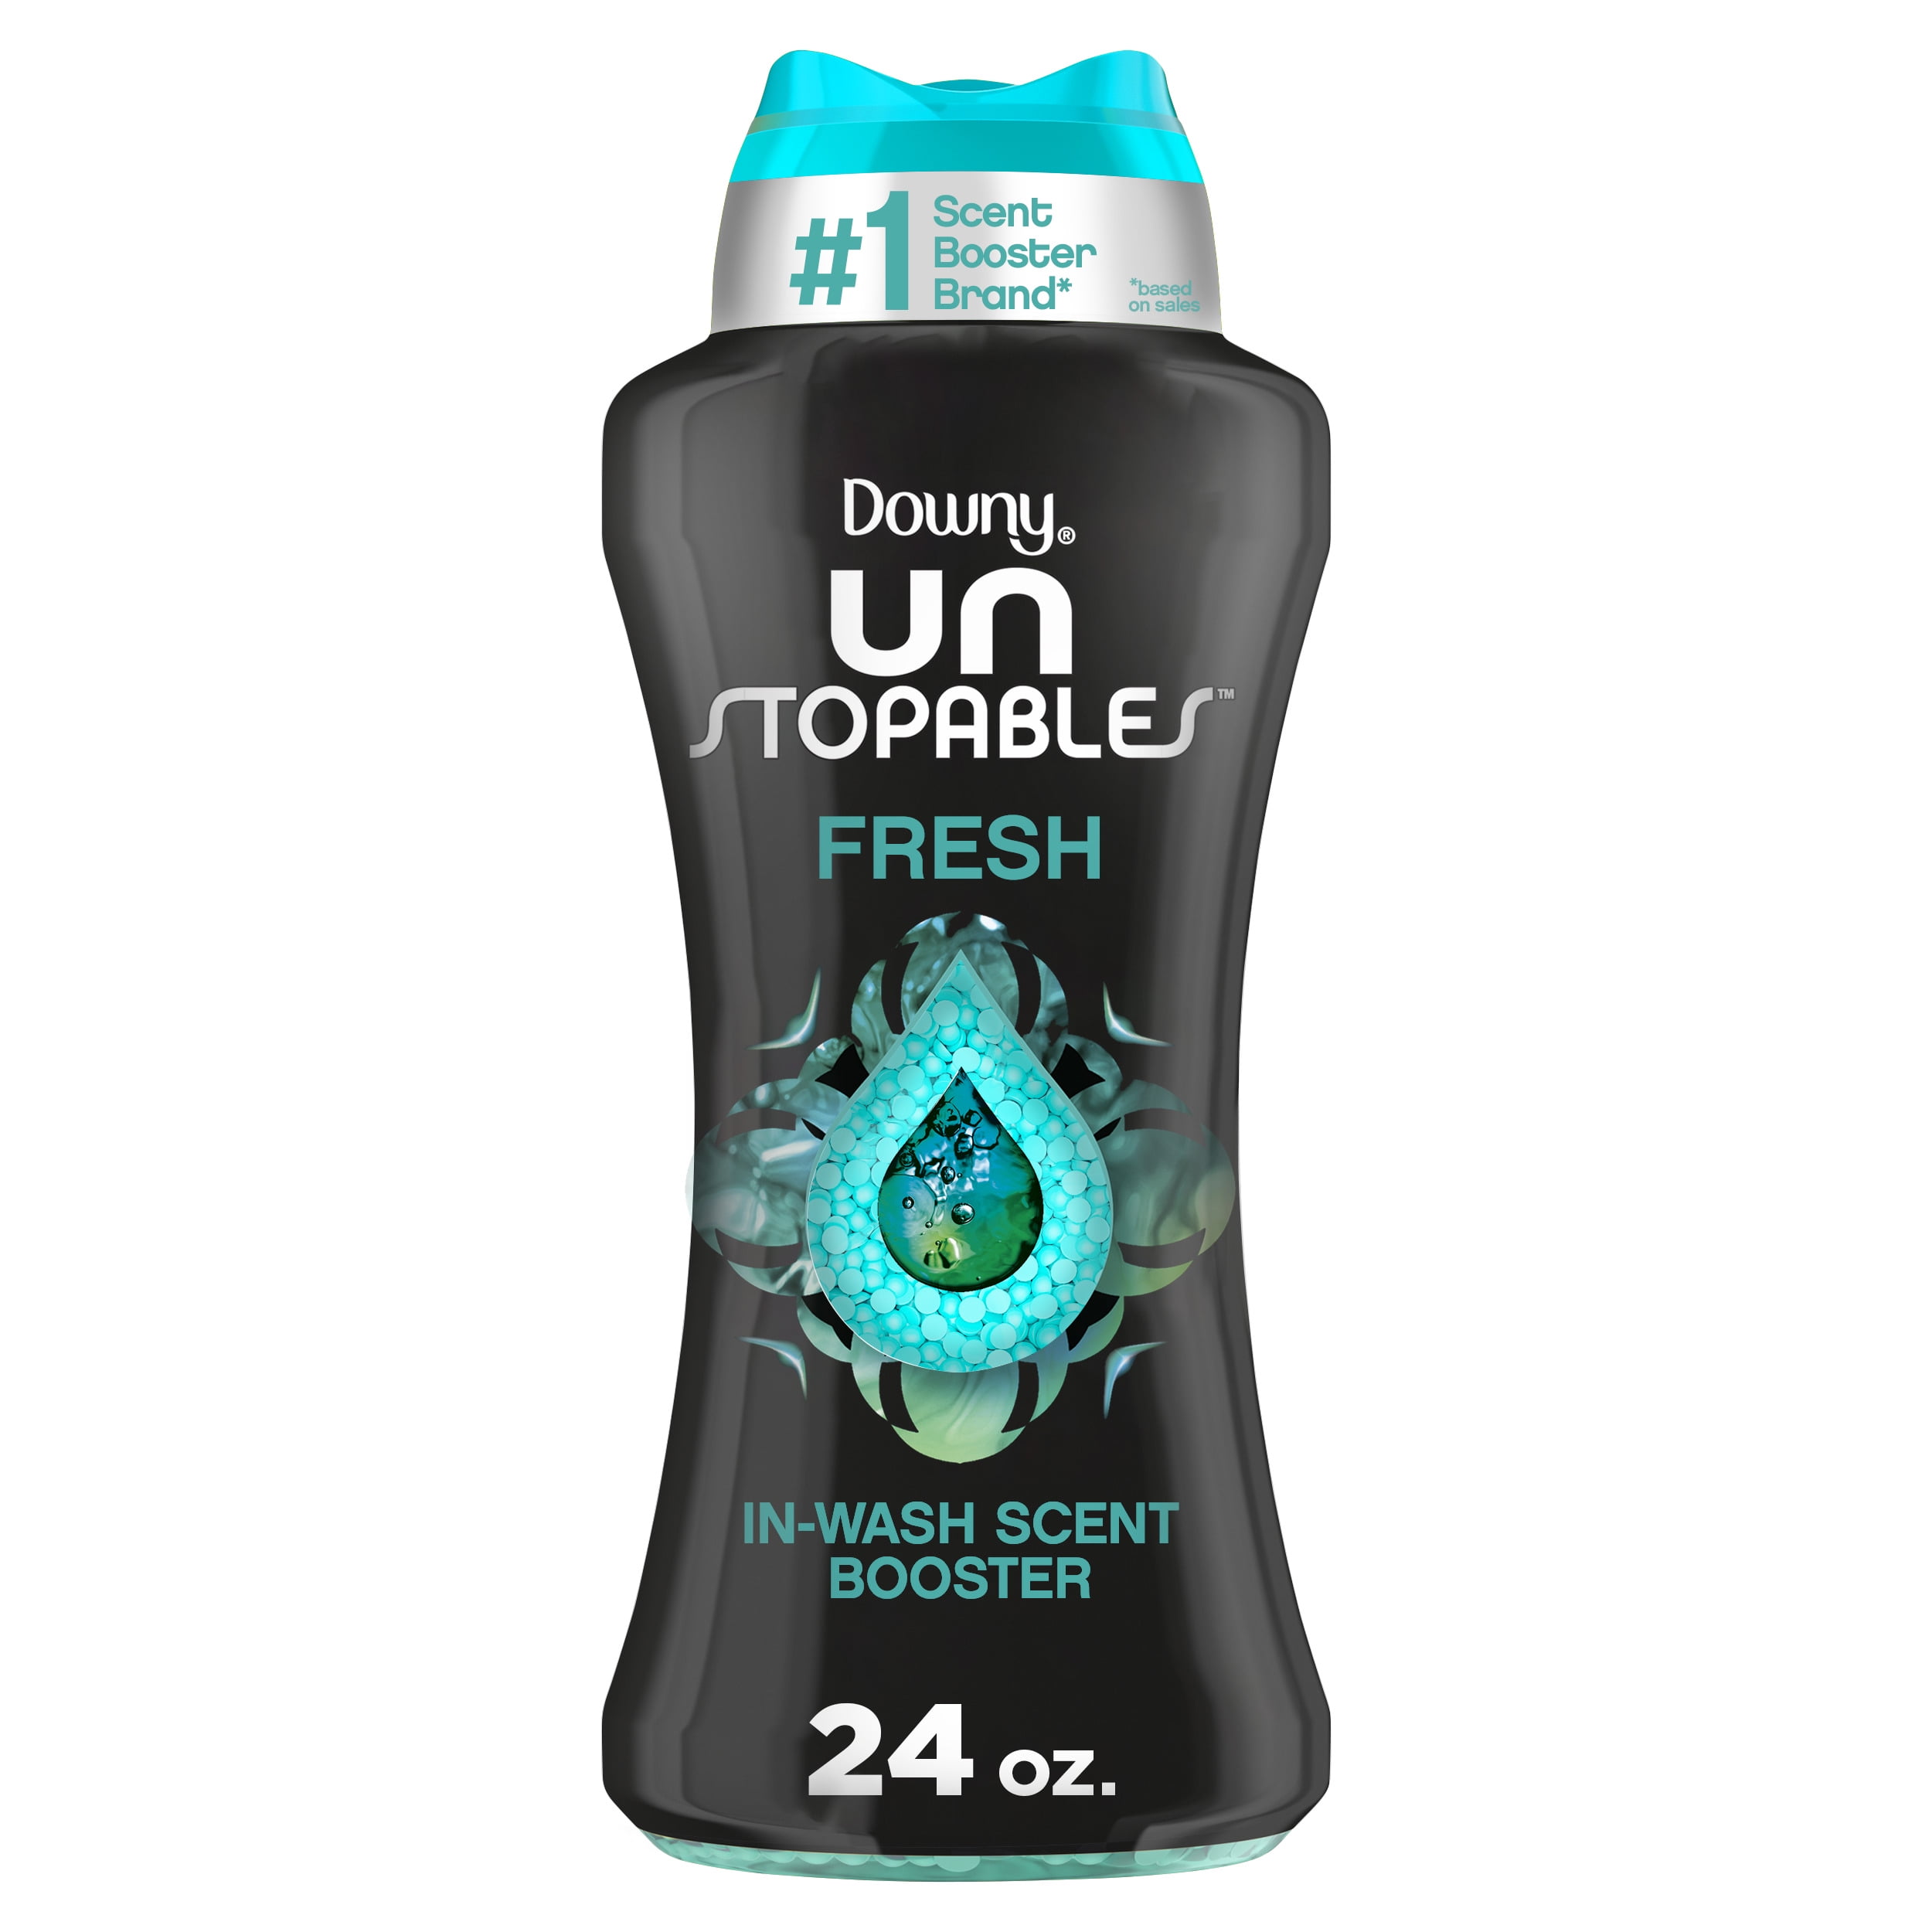 Downy Unstopables Fresh, 26.5 oz in-Wash Scent Booster Beads